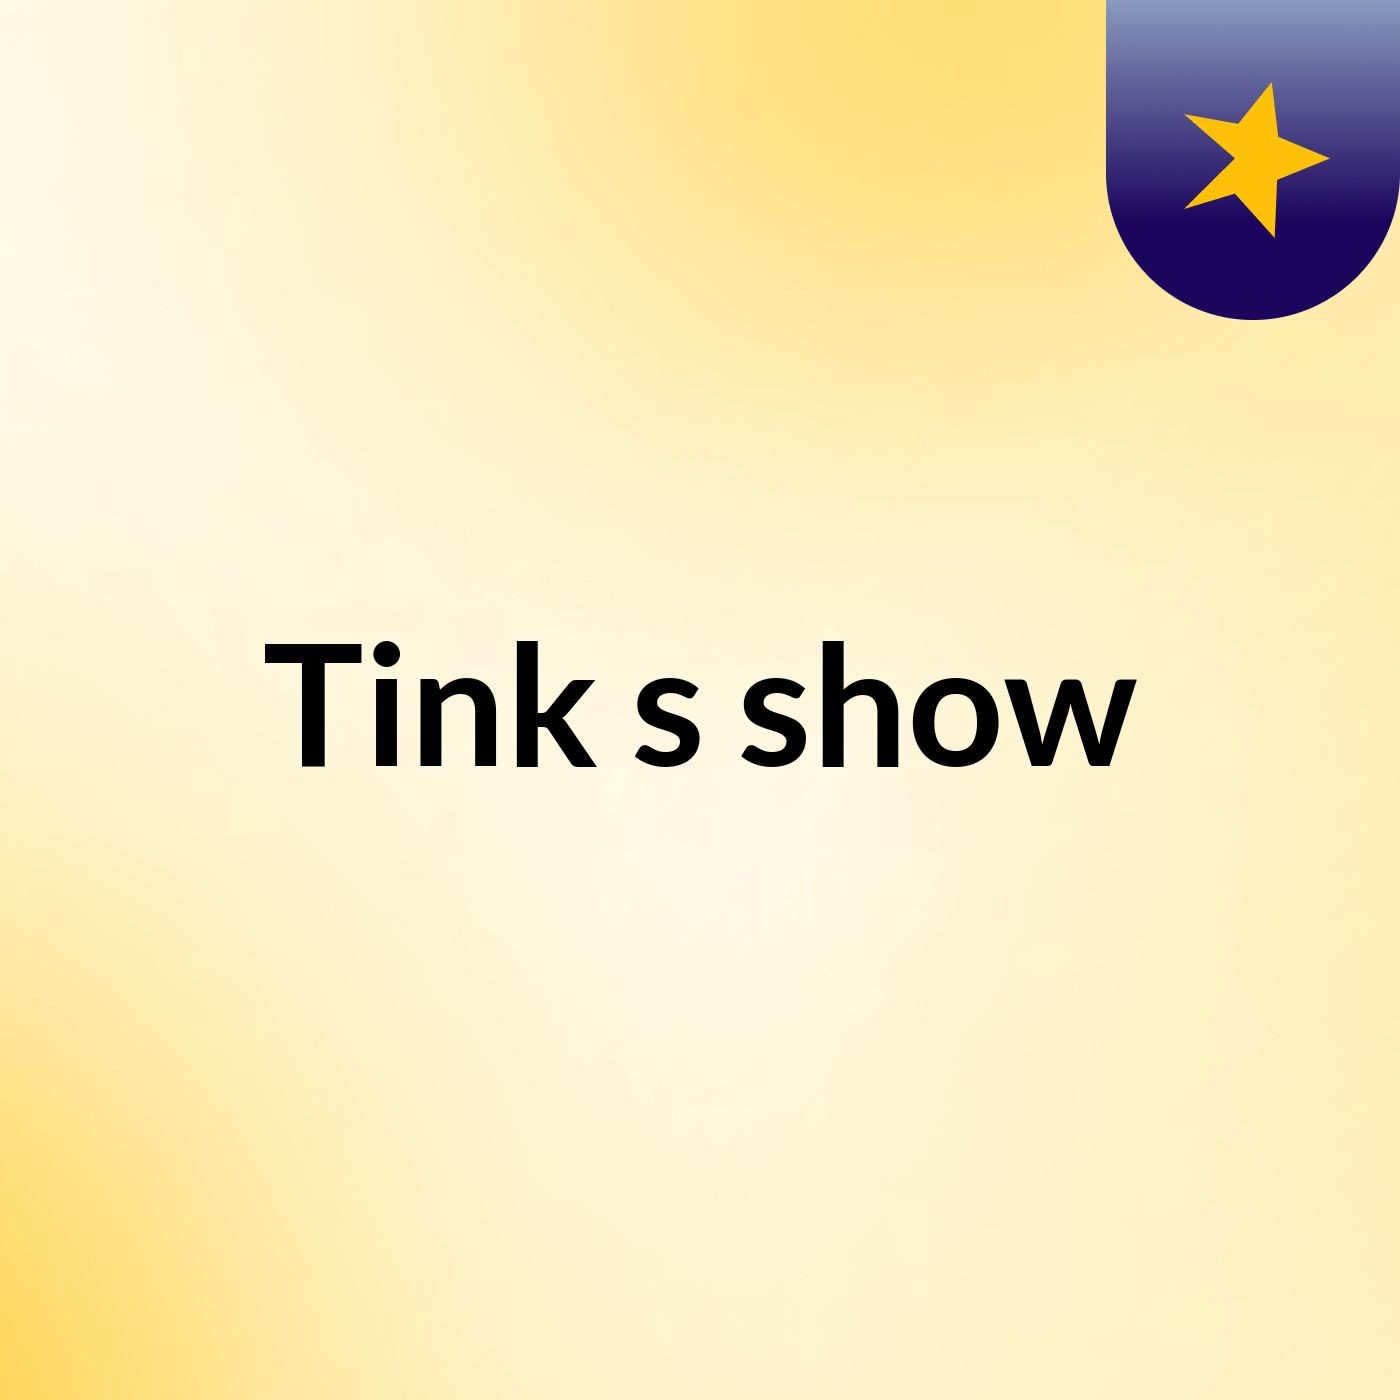 Tink's show